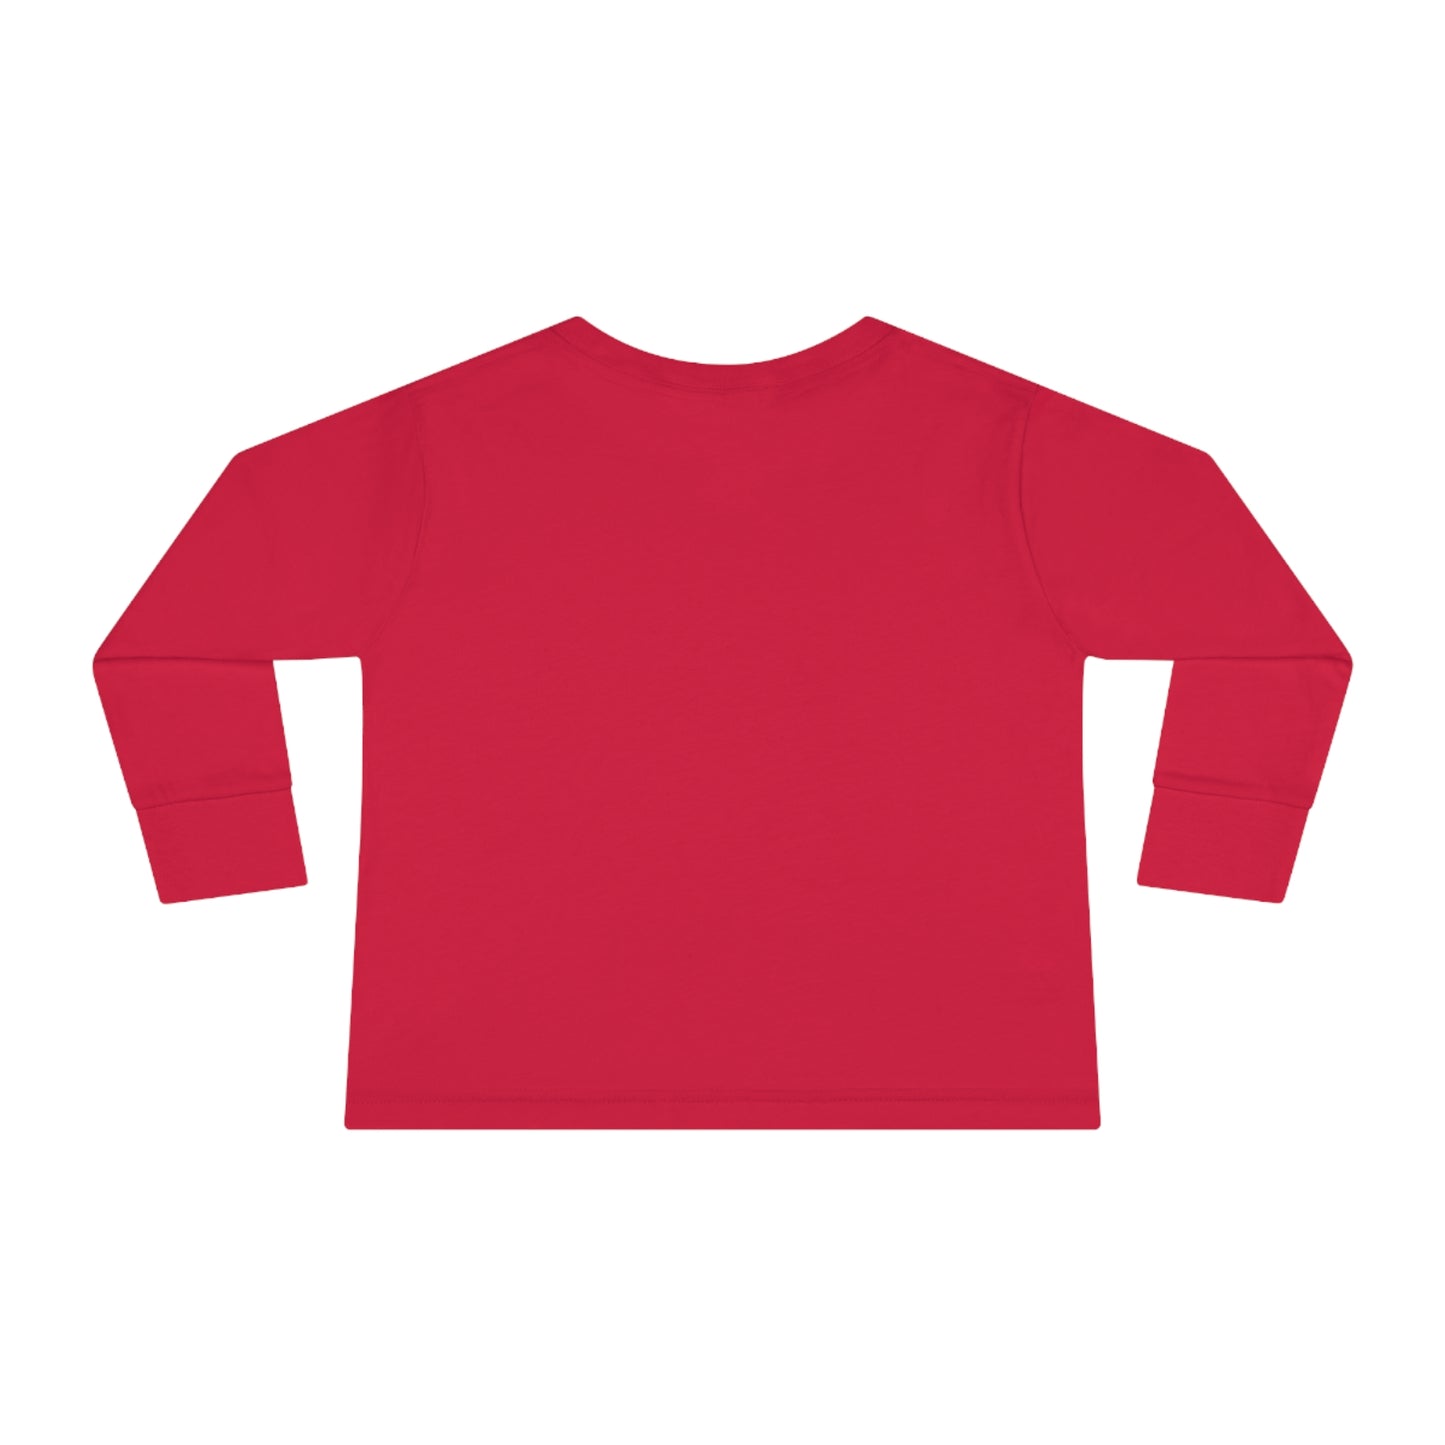 A Printify Kids Christmas Tree Long Sleeve Tee - Toddler Crew Neck T-Shirt, a toddler-sized red long-sleeved shirt on a white background, perfect for a holiday wardrobe.